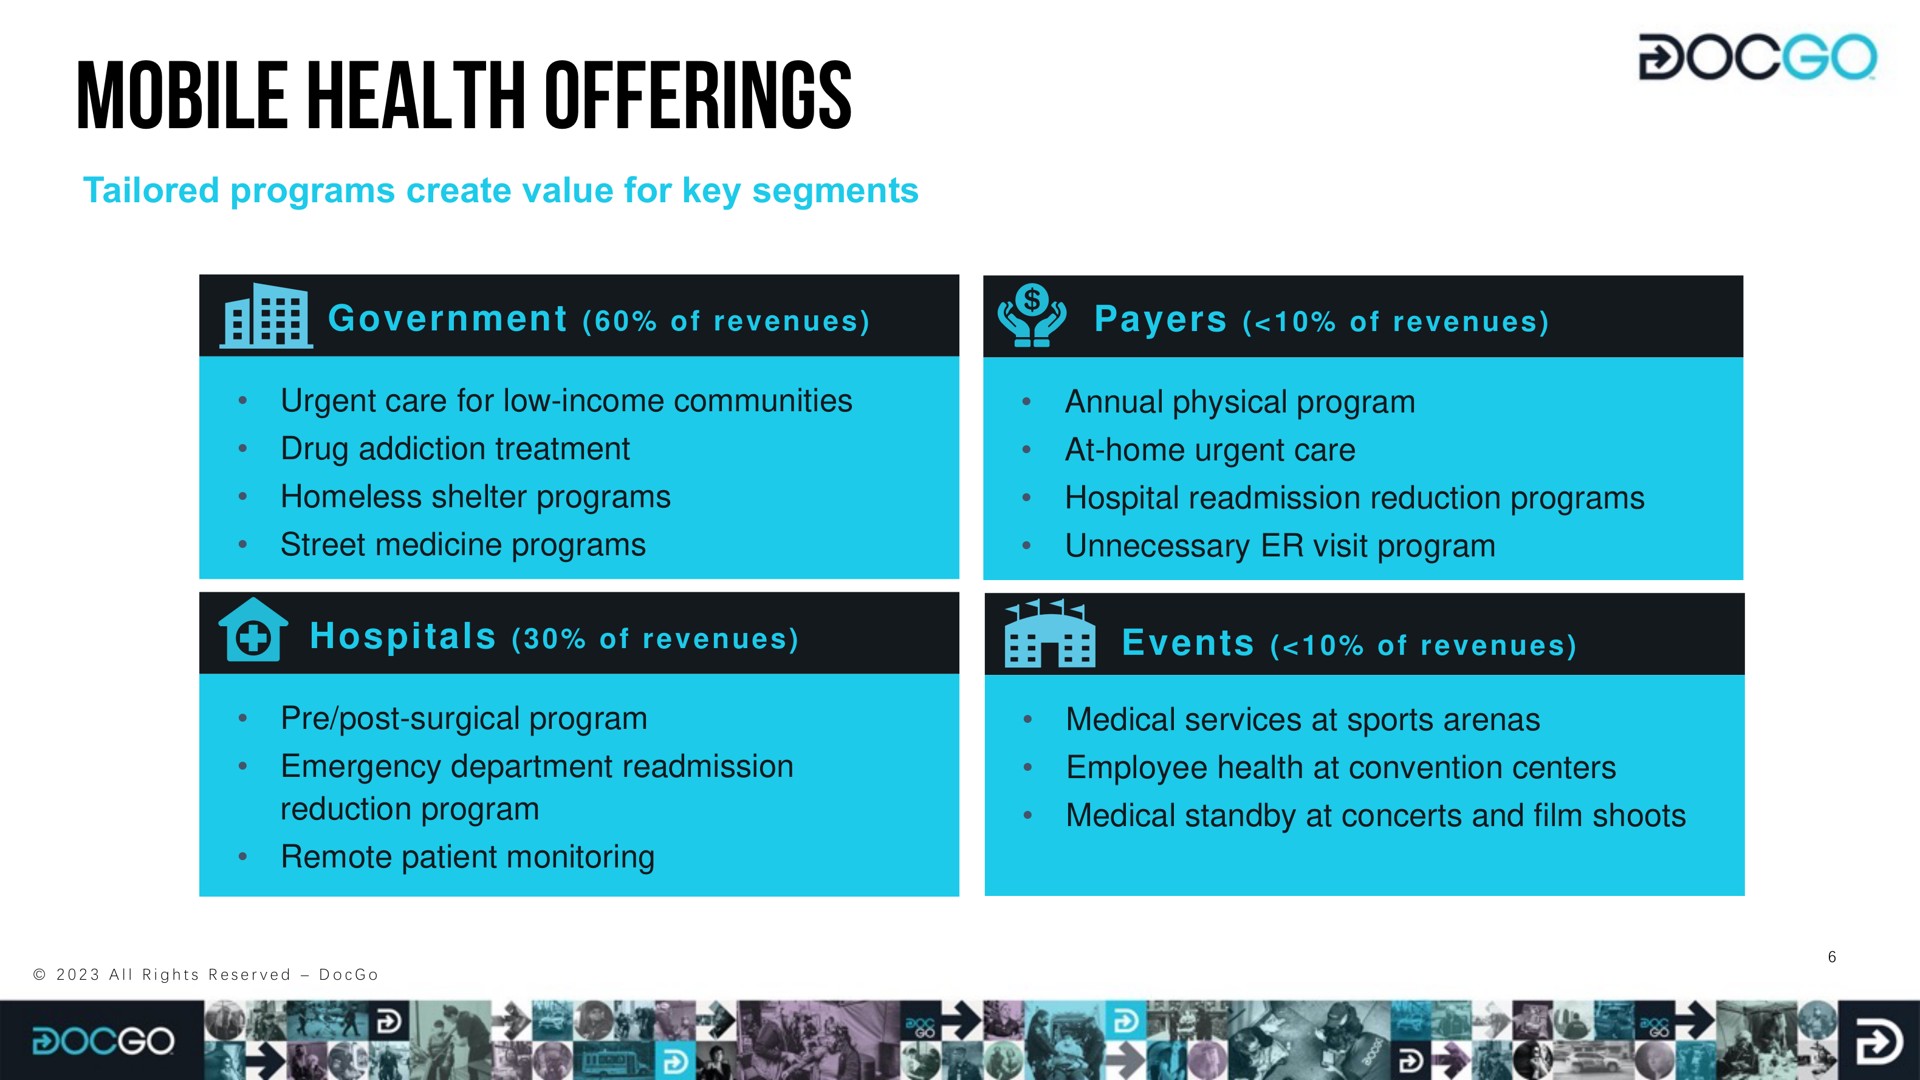 mobile health offerings | DocGo